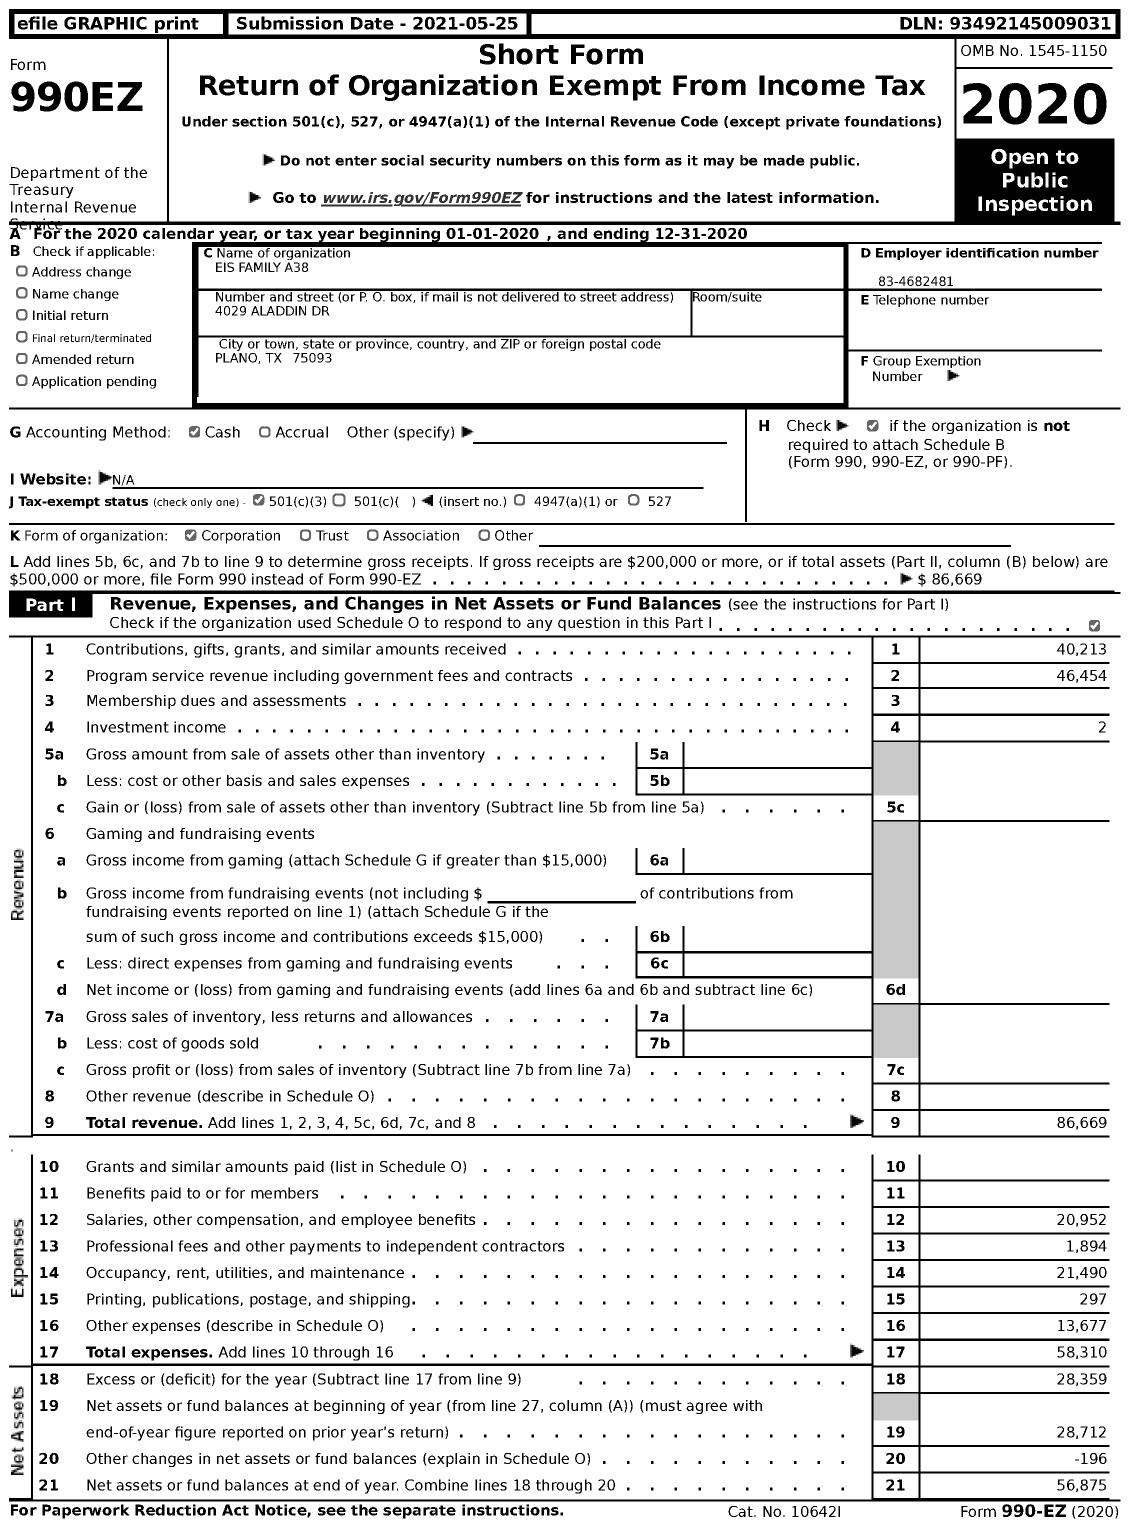 Image of first page of 2020 Form 990EZ for Eis Family A38